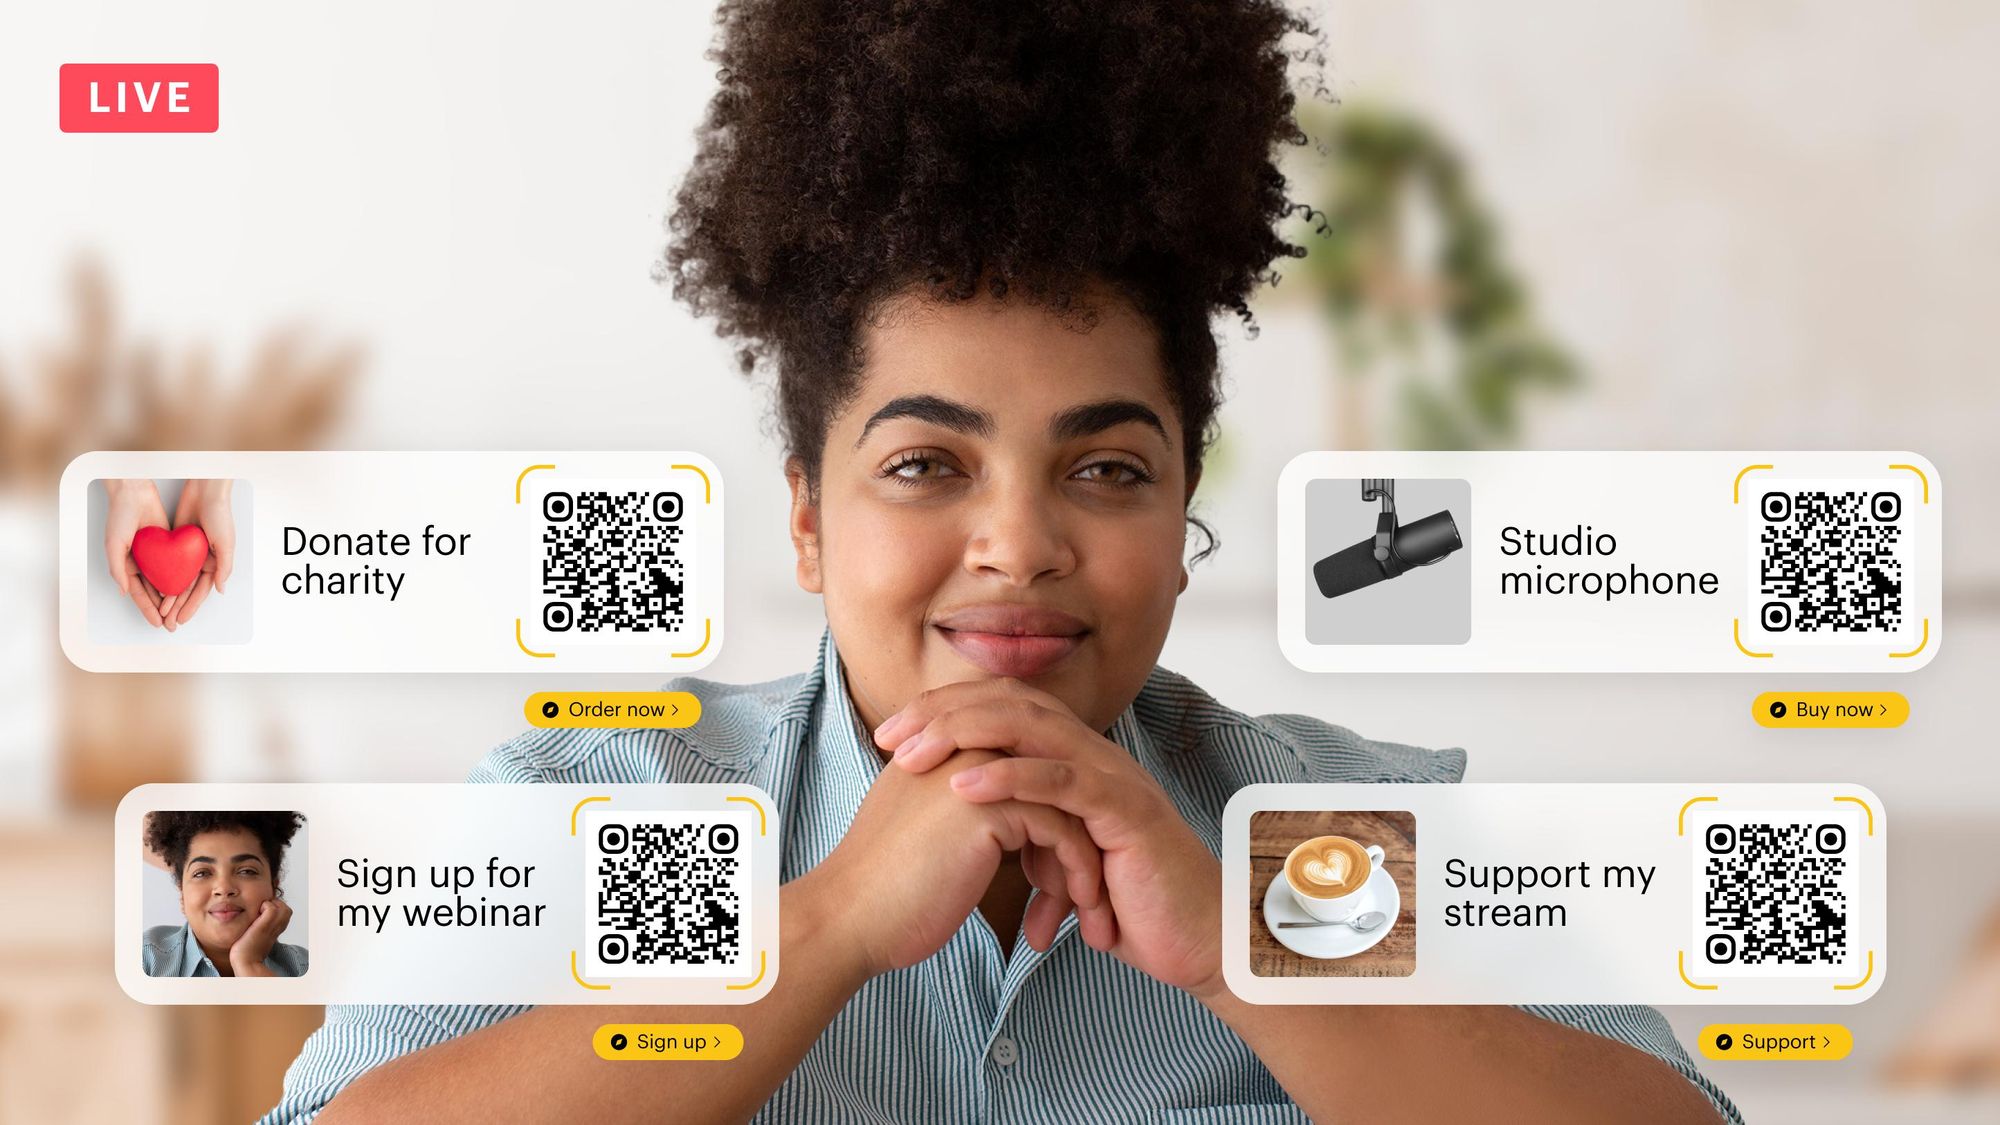 5 ways to use QR codes in your live streams